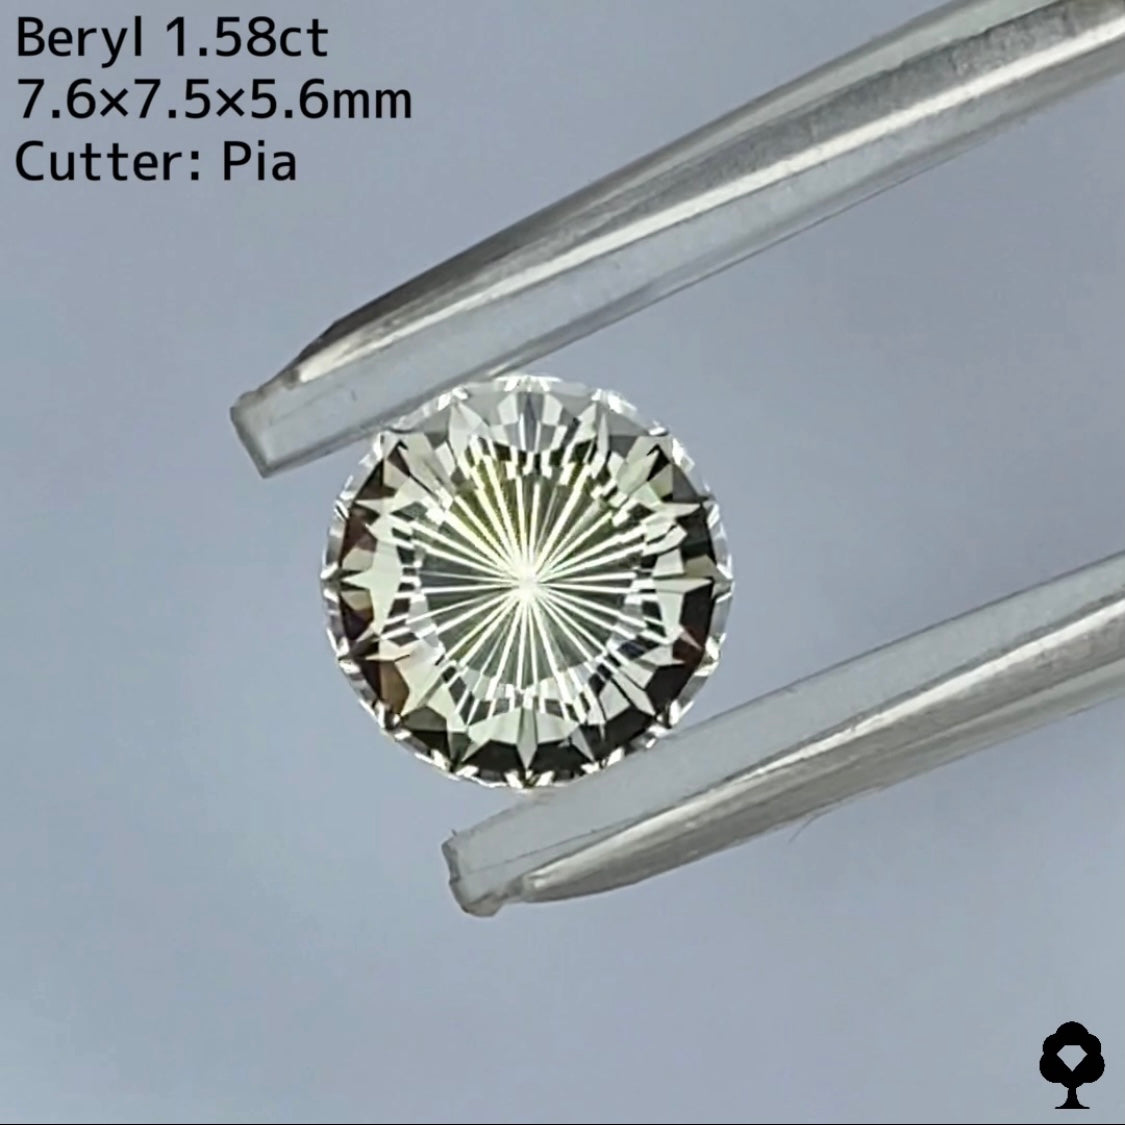 【SOLD OUT】ベリル1.58ct★チャットオークション